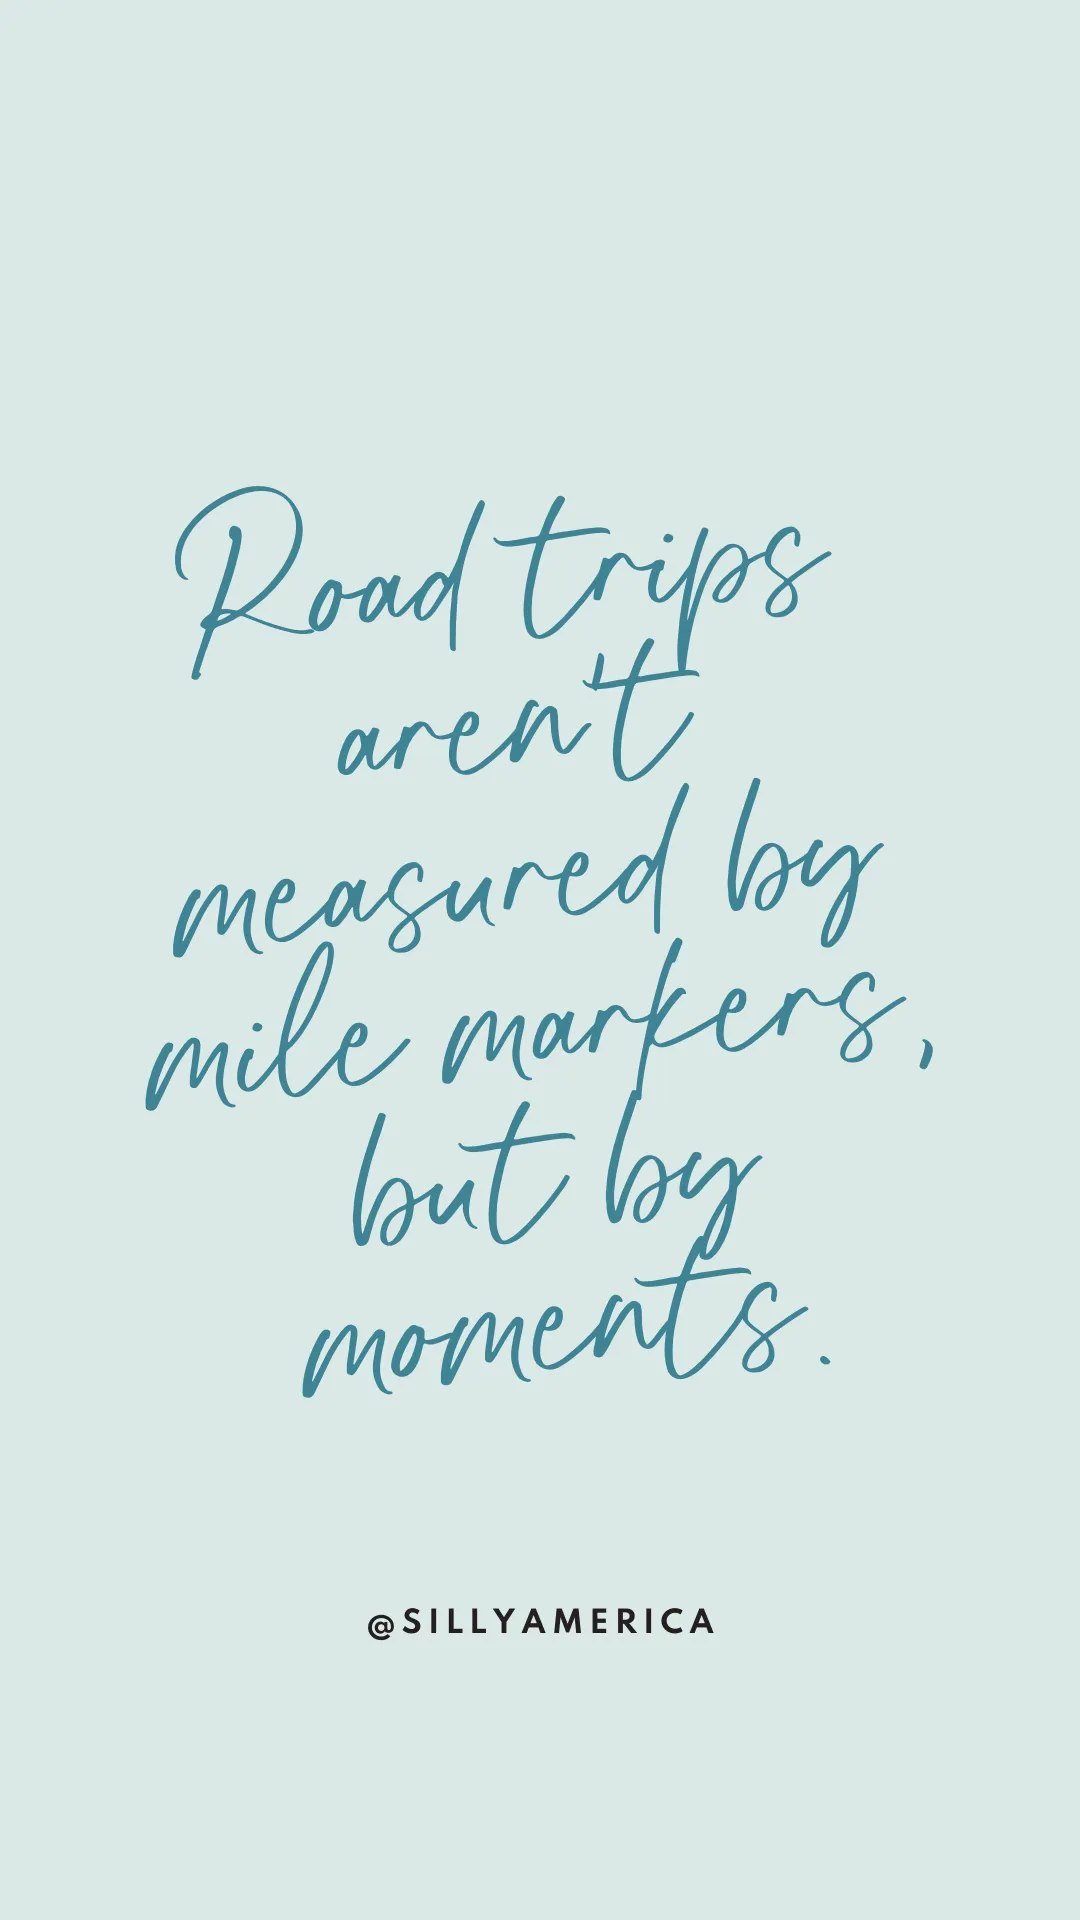 Road trips aren’t measured by mile markers, but by moments. - Road Trip Captions for Instagram